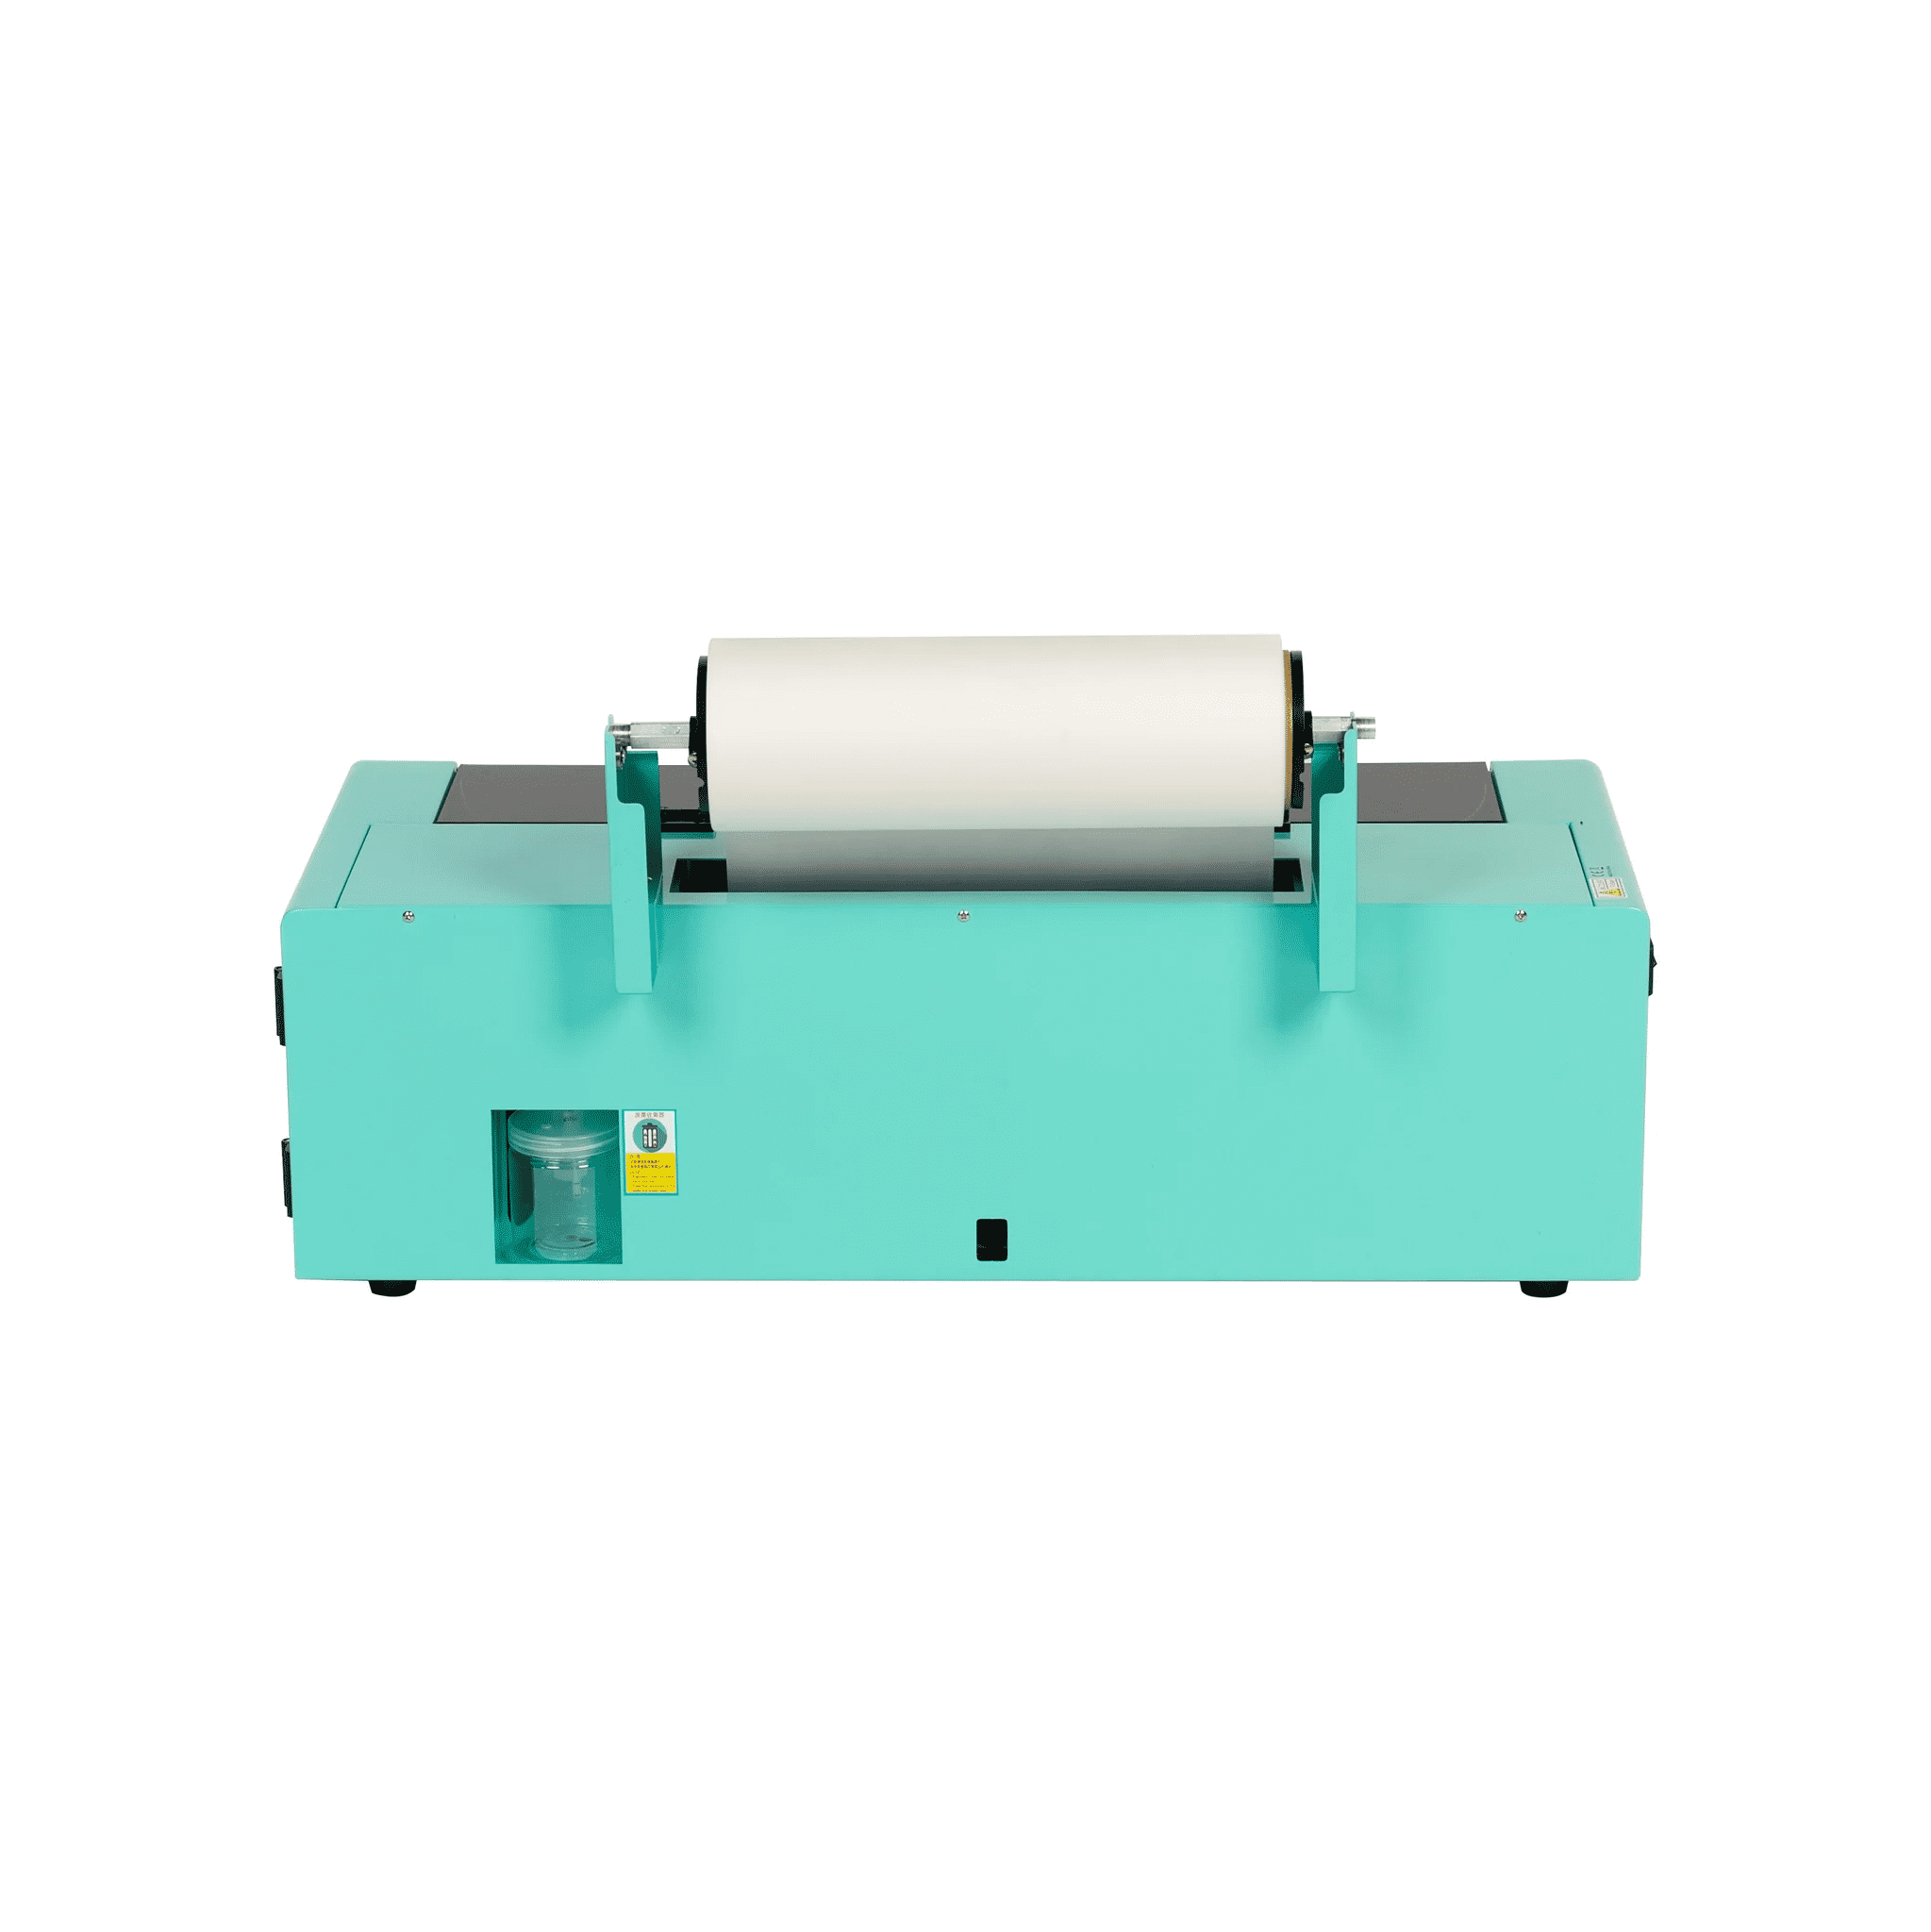 Procolored DTF Transfer Printer A3+ L1800 DTF Printer T Shirt Printing  Machine With Curing Oven for Clothes Hoodies Jeans